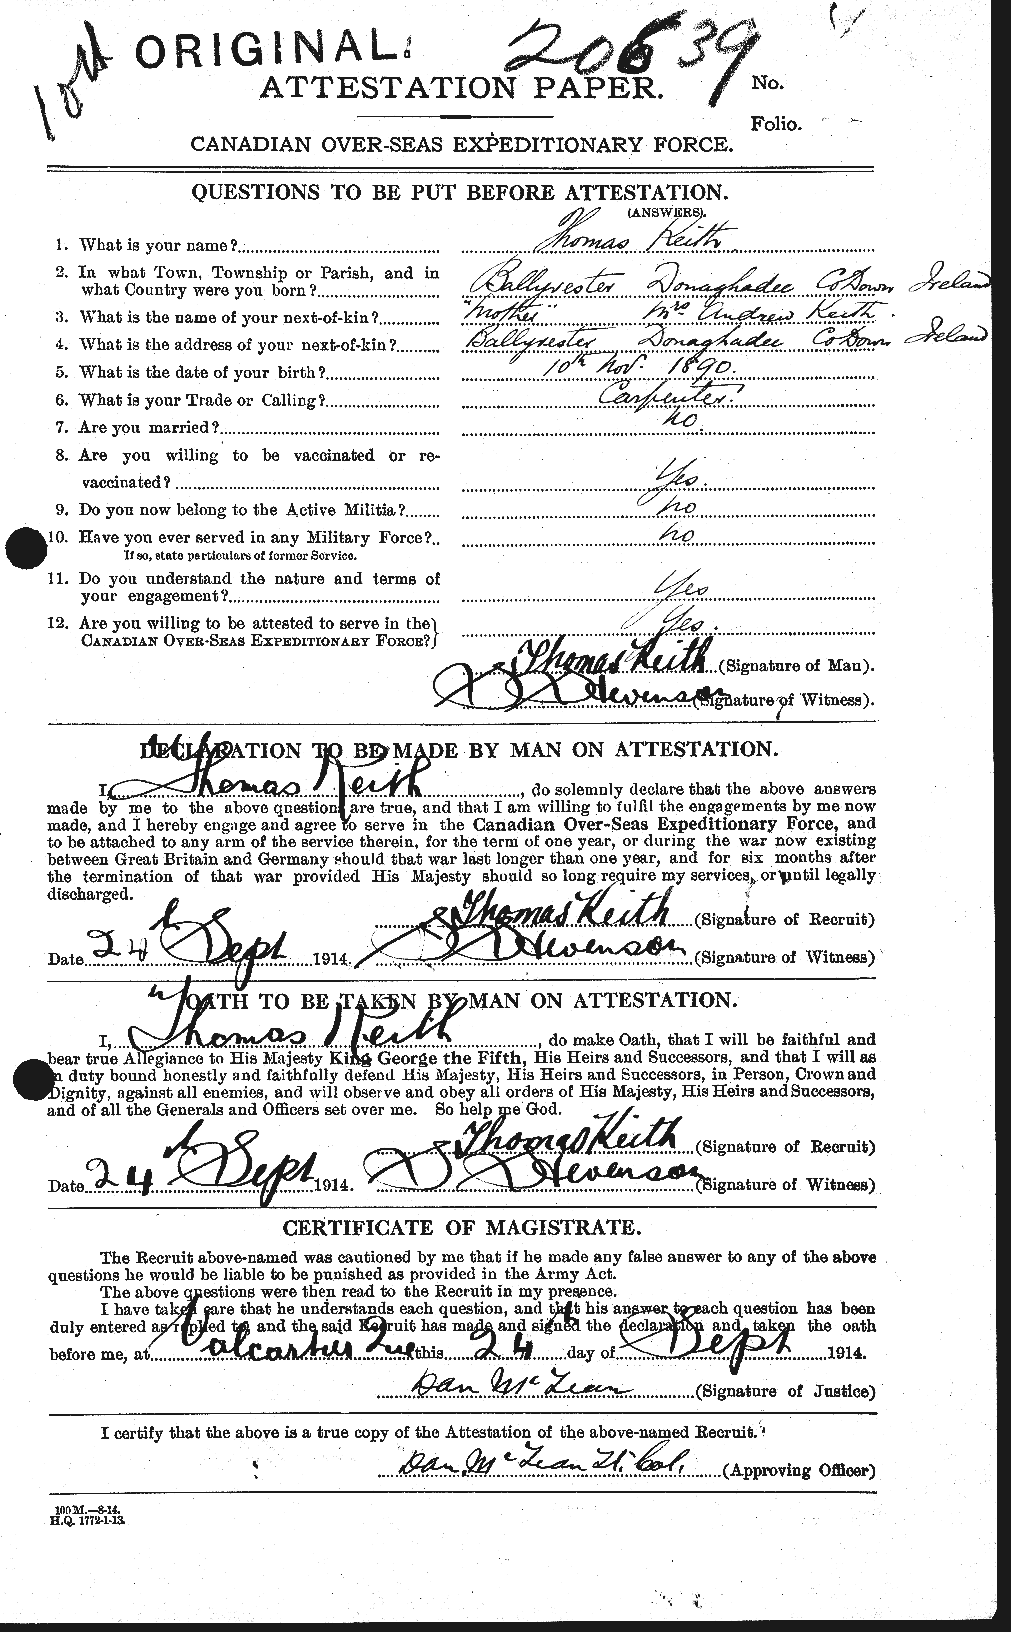 Personnel Records of the First World War - CEF 432506a